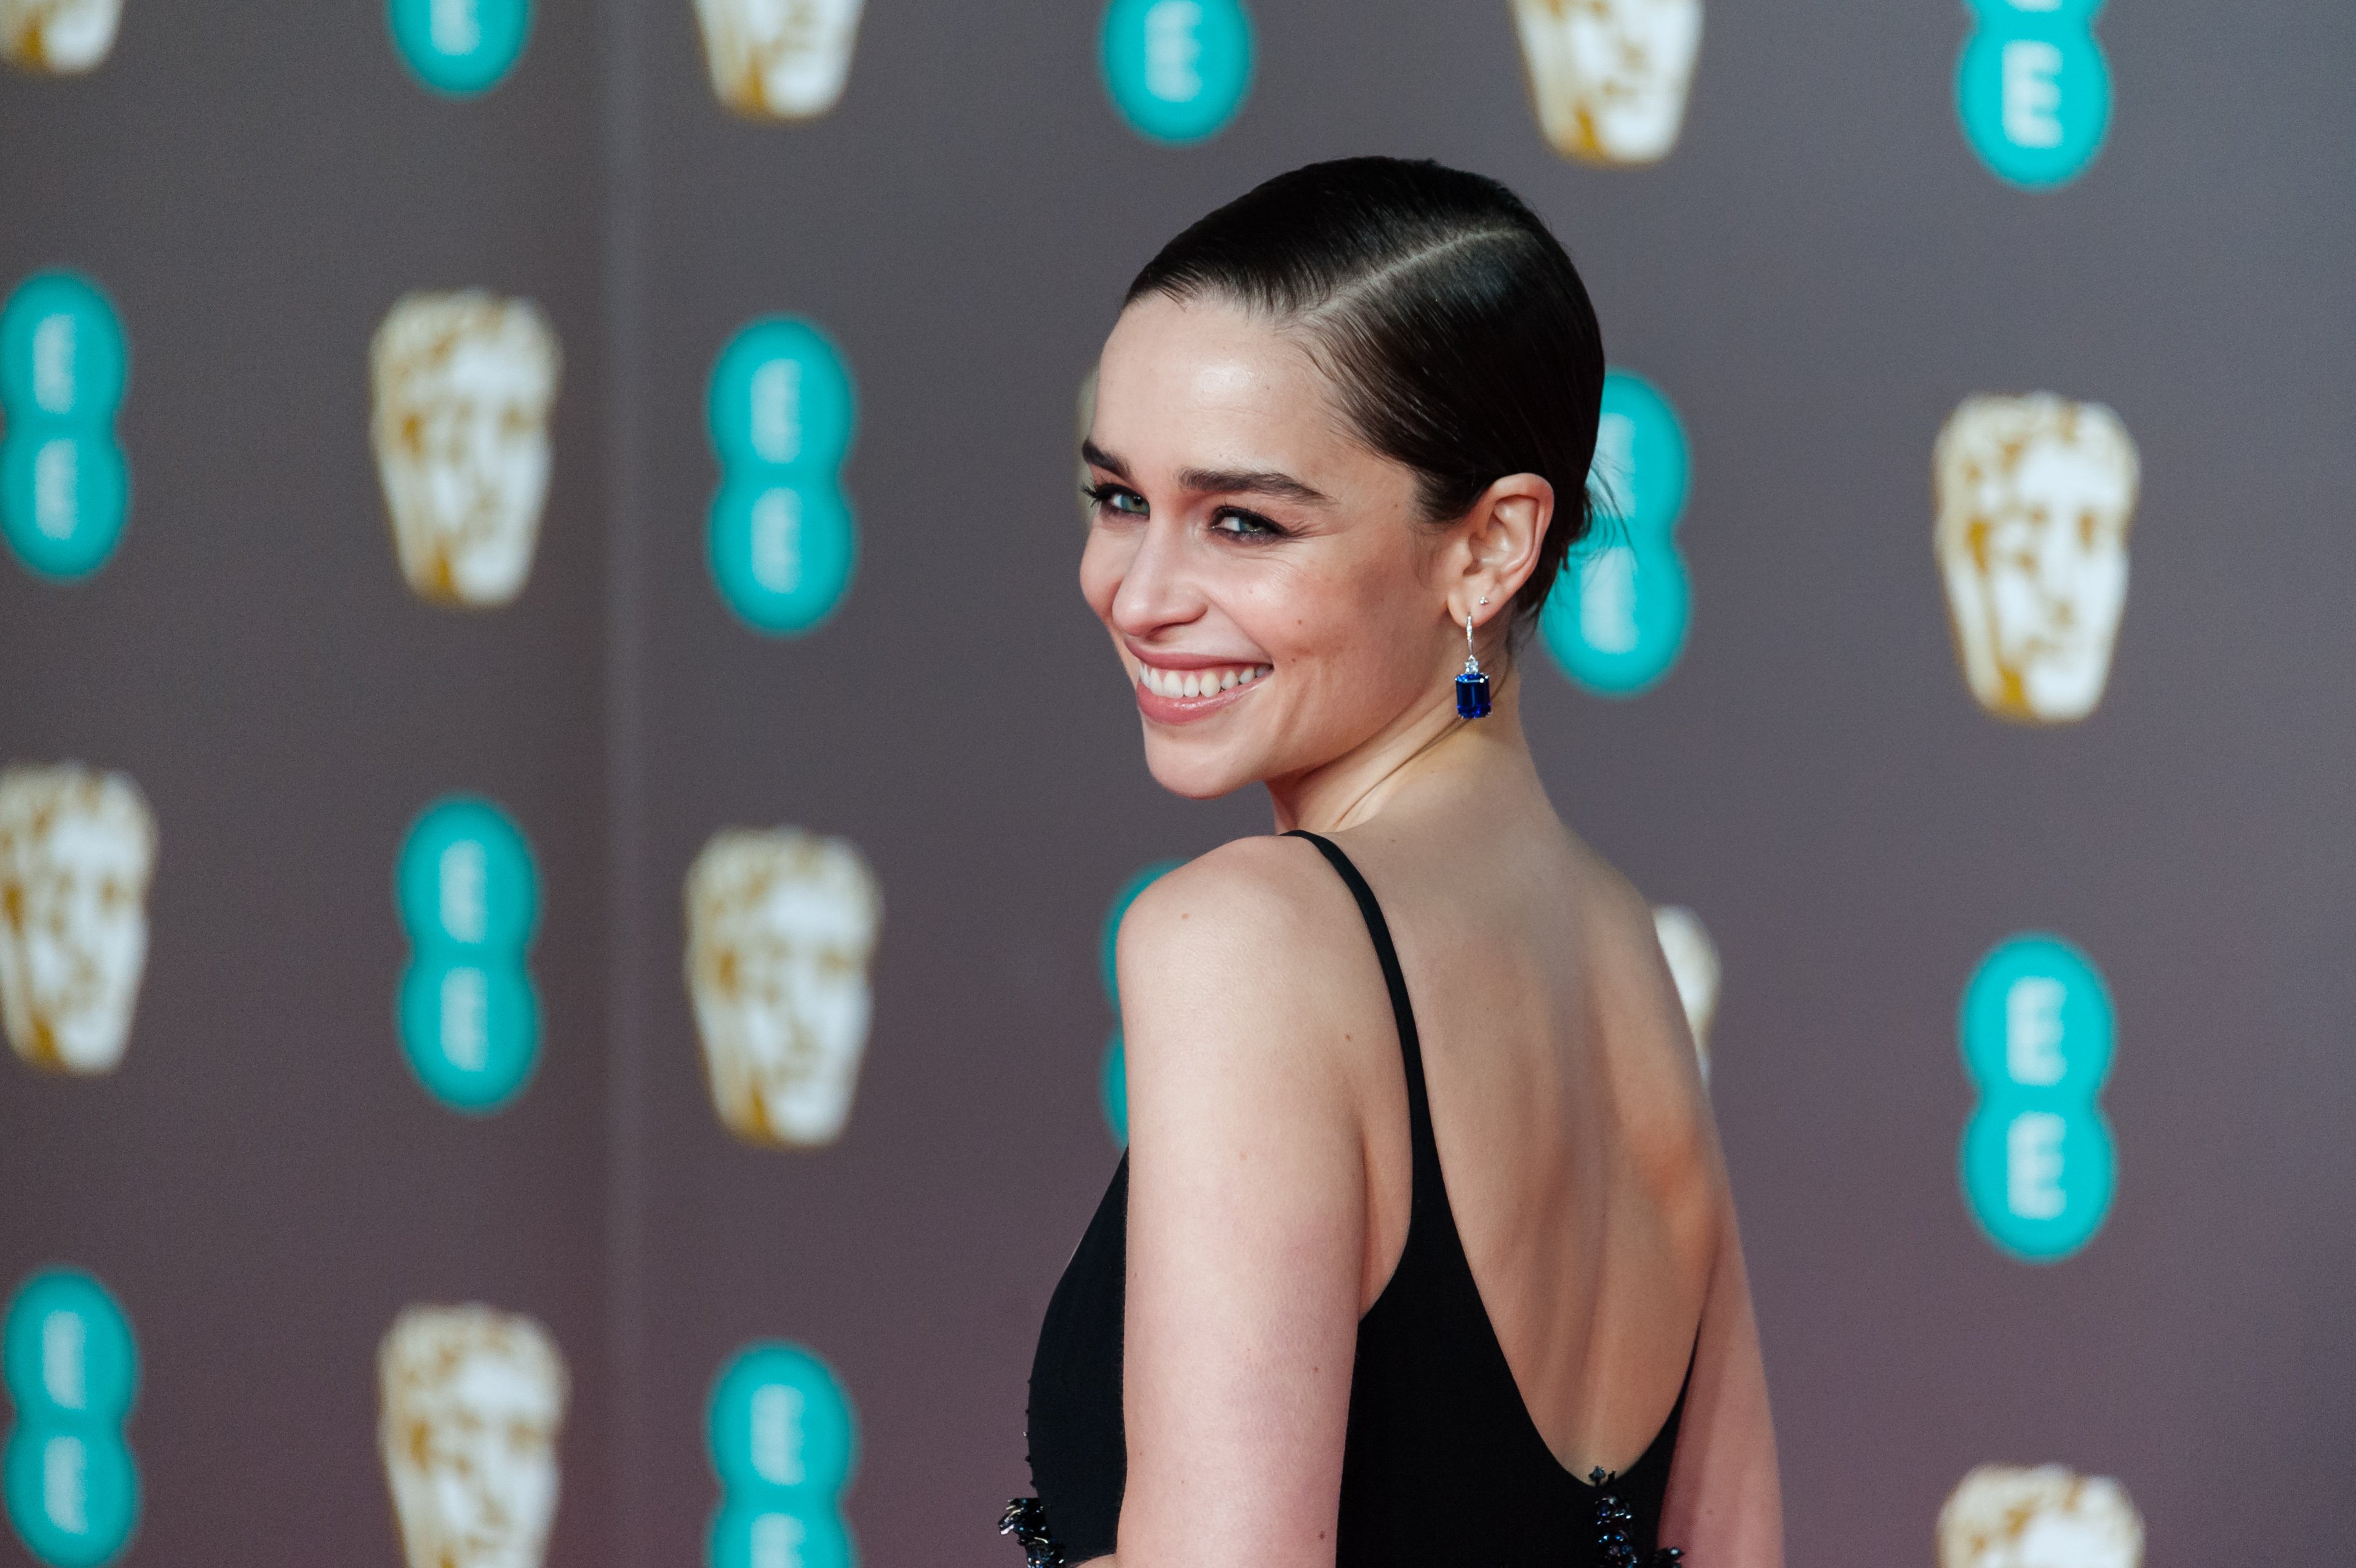 Emilia Clarke attends the EE British Academy Film Awards ceremony at the Royal Albert Hall on February 2, 2020, in London, England. | Source: Getty Images